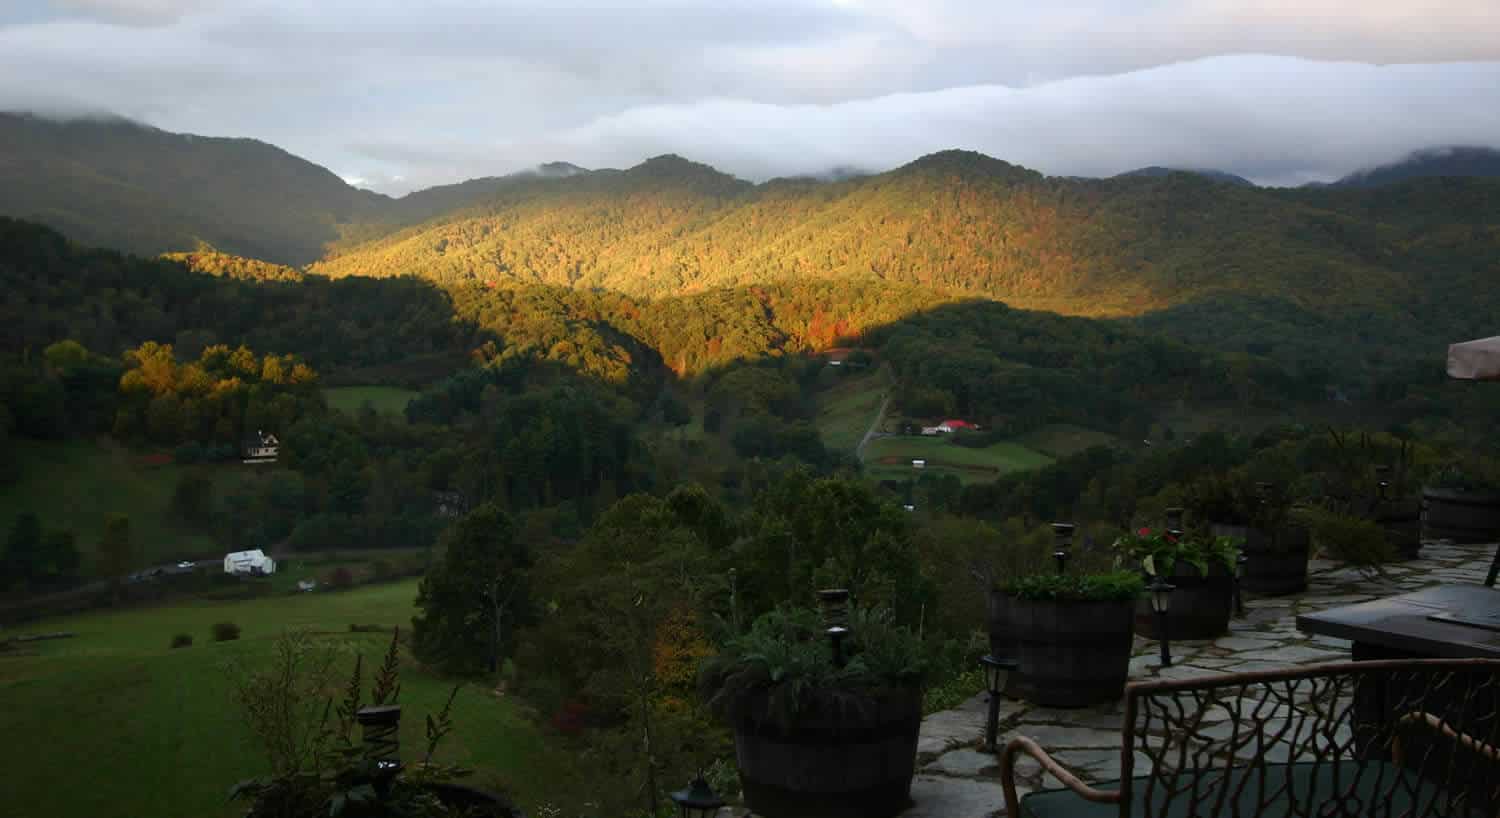 The sun rises over the mountain valley, with wooded hills surrounding a stone patio. 